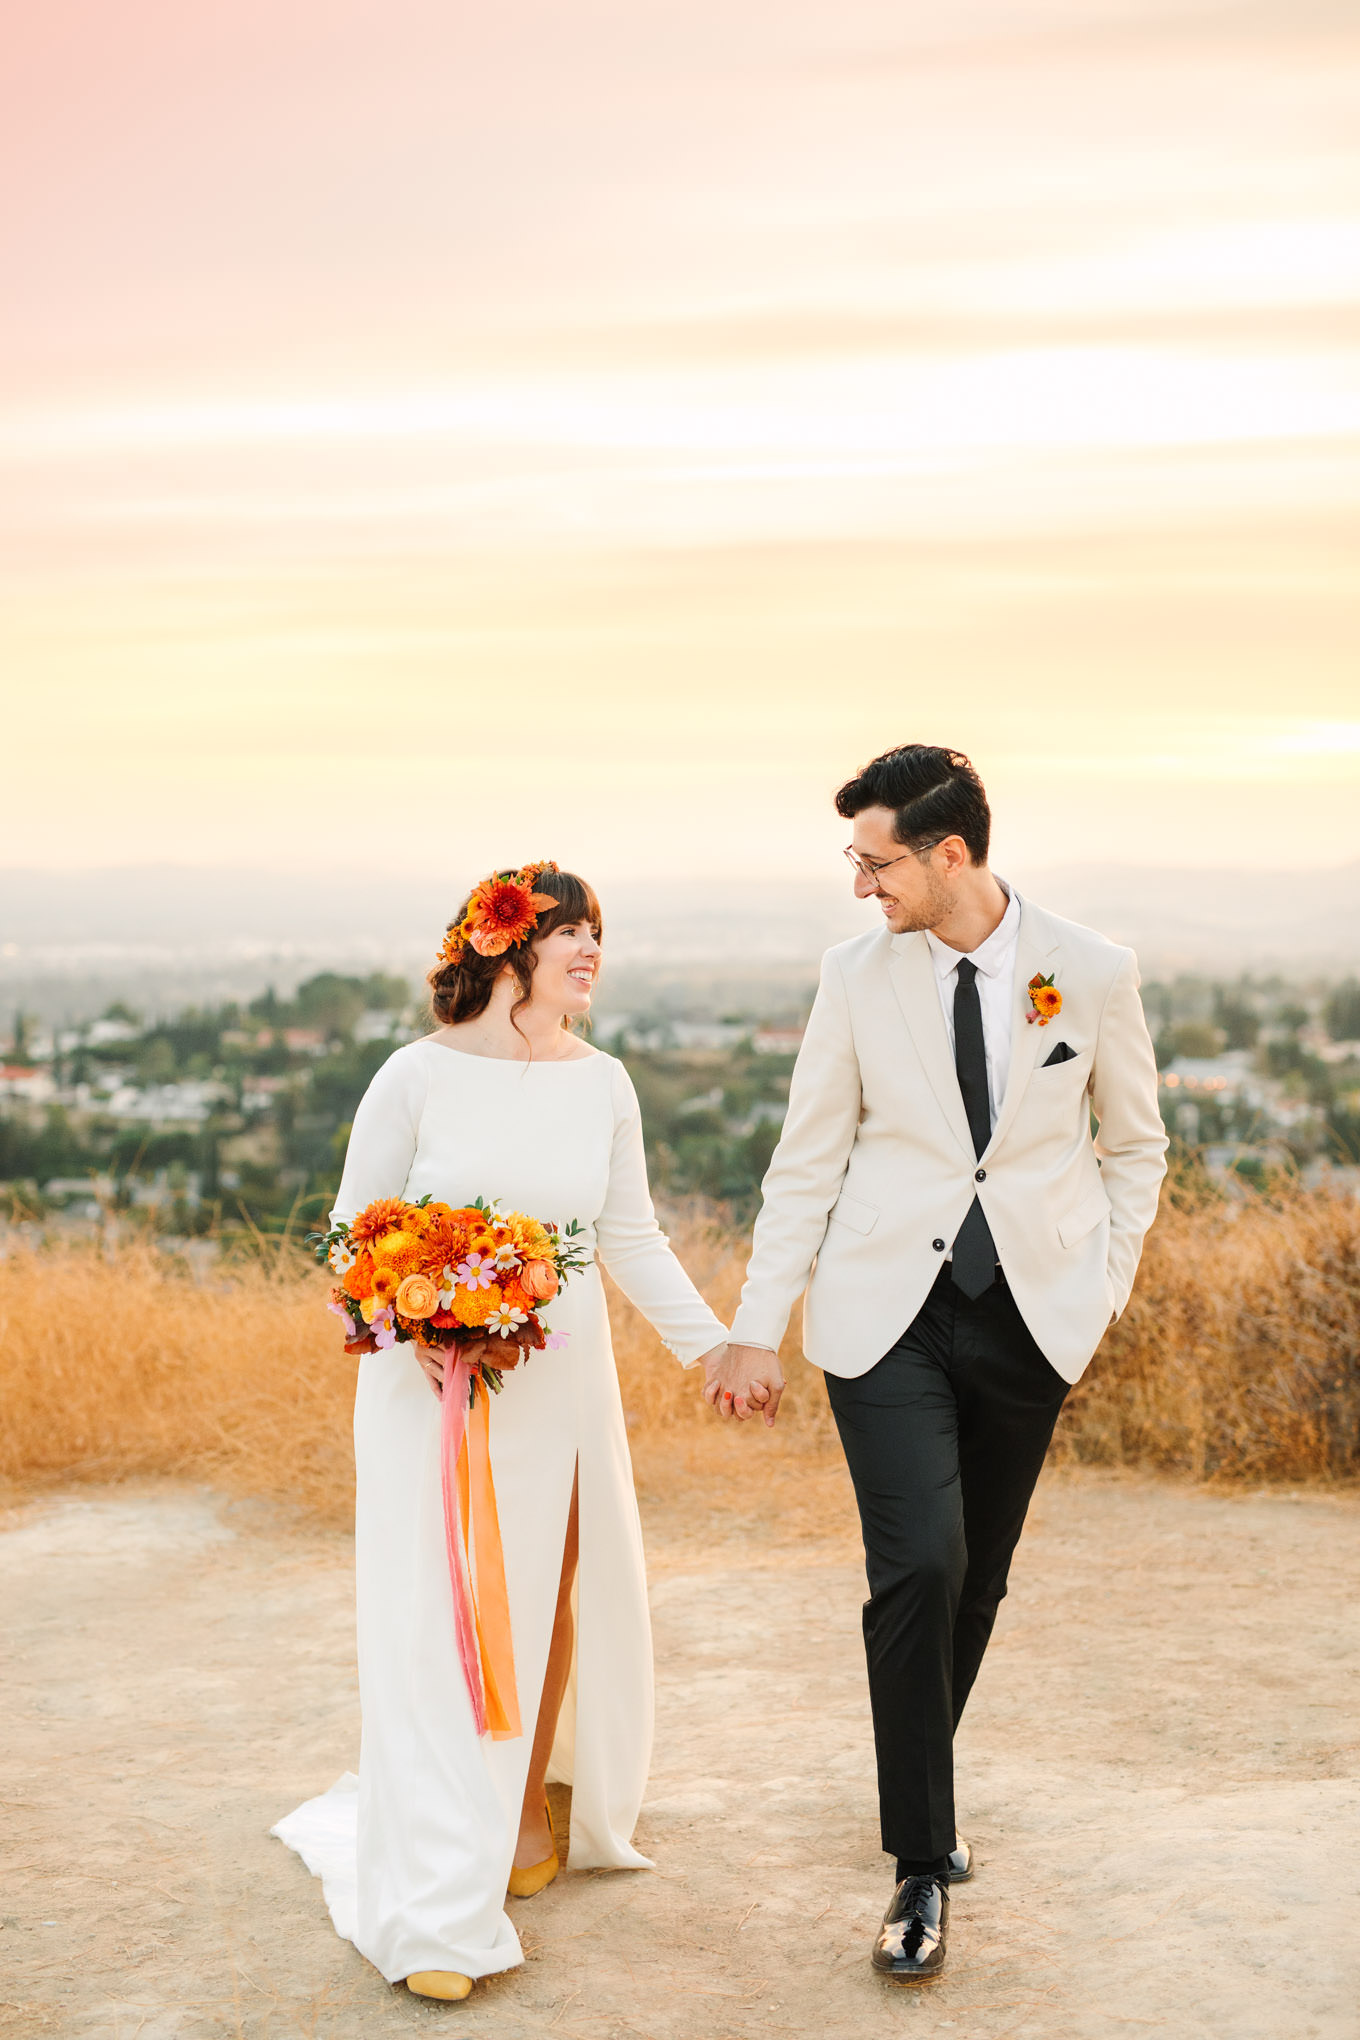 Bride and groom with cityscape backdrop | Vibrant backyard micro wedding featured on Green Wedding Shoes | Colorful LA wedding photography | #losangeleswedding #backyardwedding #microwedding #laweddingphotographer Source: Mary Costa Photography | Los Angeles